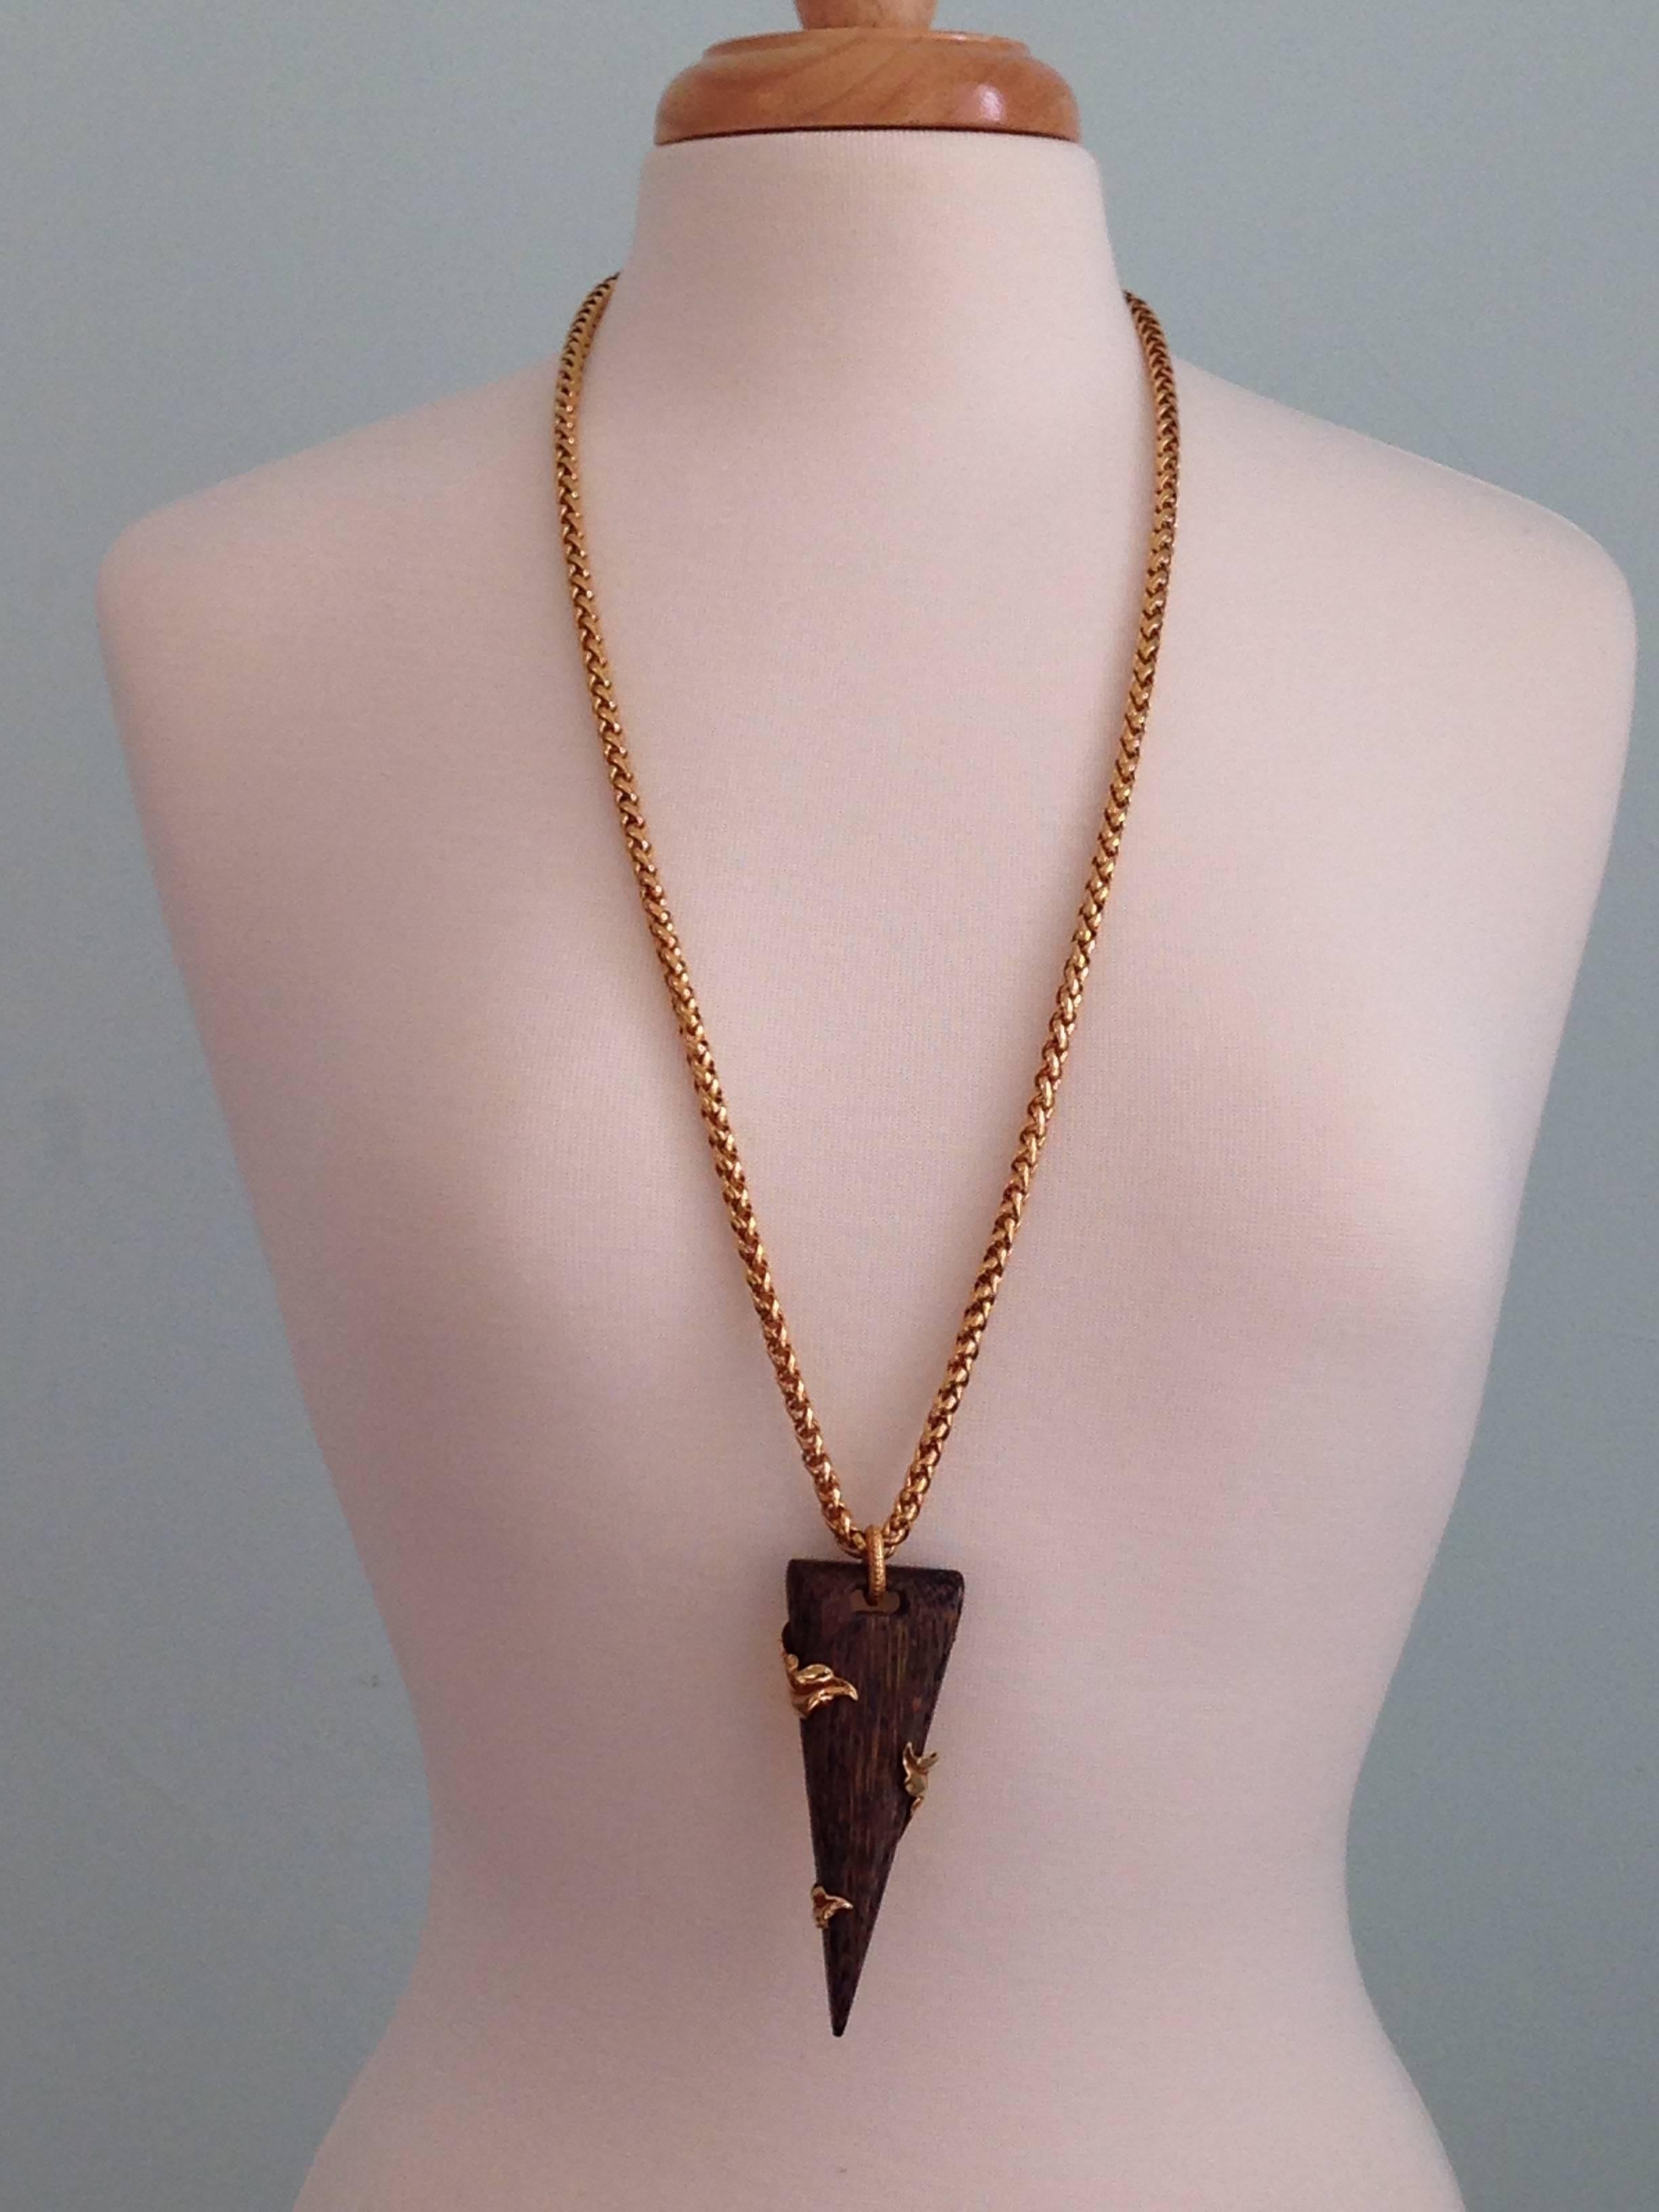 Amazing statement necklace from Dominique Aurientis featuring a long 34" gold tone chain and a faux wood pendant accented with gold leaves measuring  4" long and 1 1/2" wide. The necklace is signed on the back with a round plaque